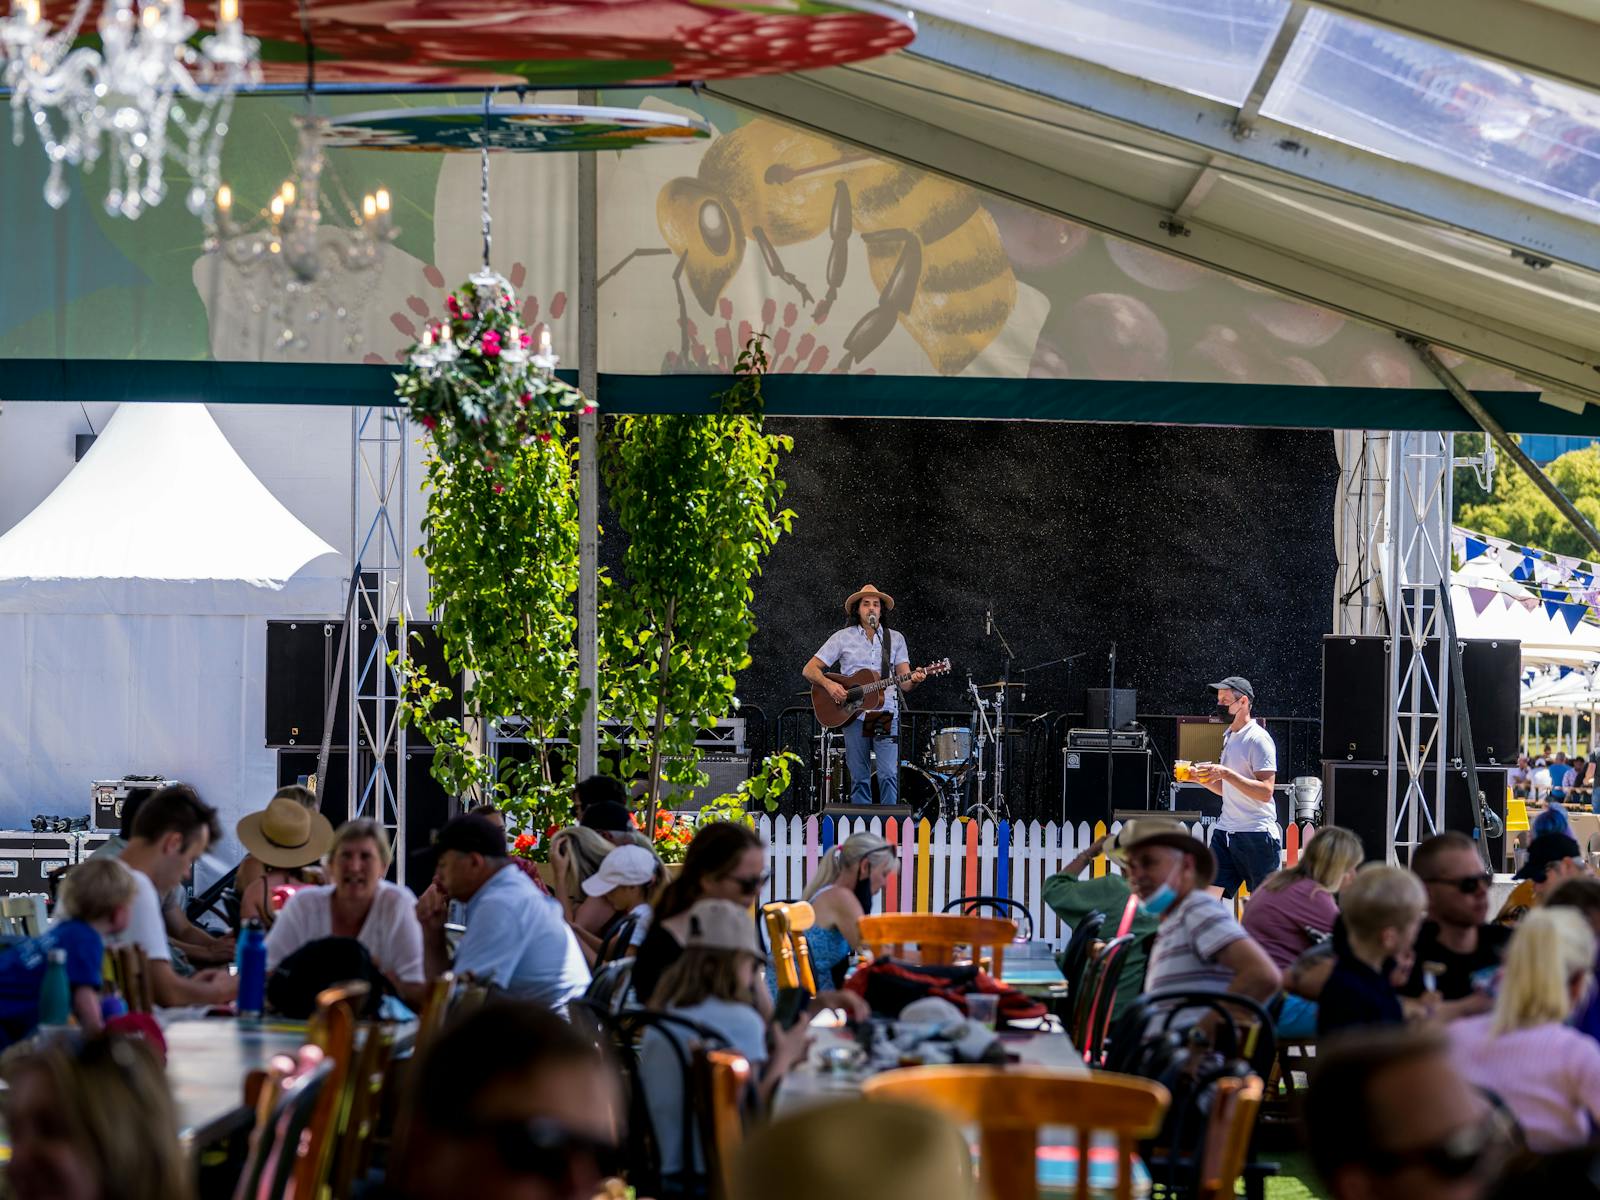 Multiple stages across Tasmania's Taste of Summer offer live entertainment showcasing local talent.